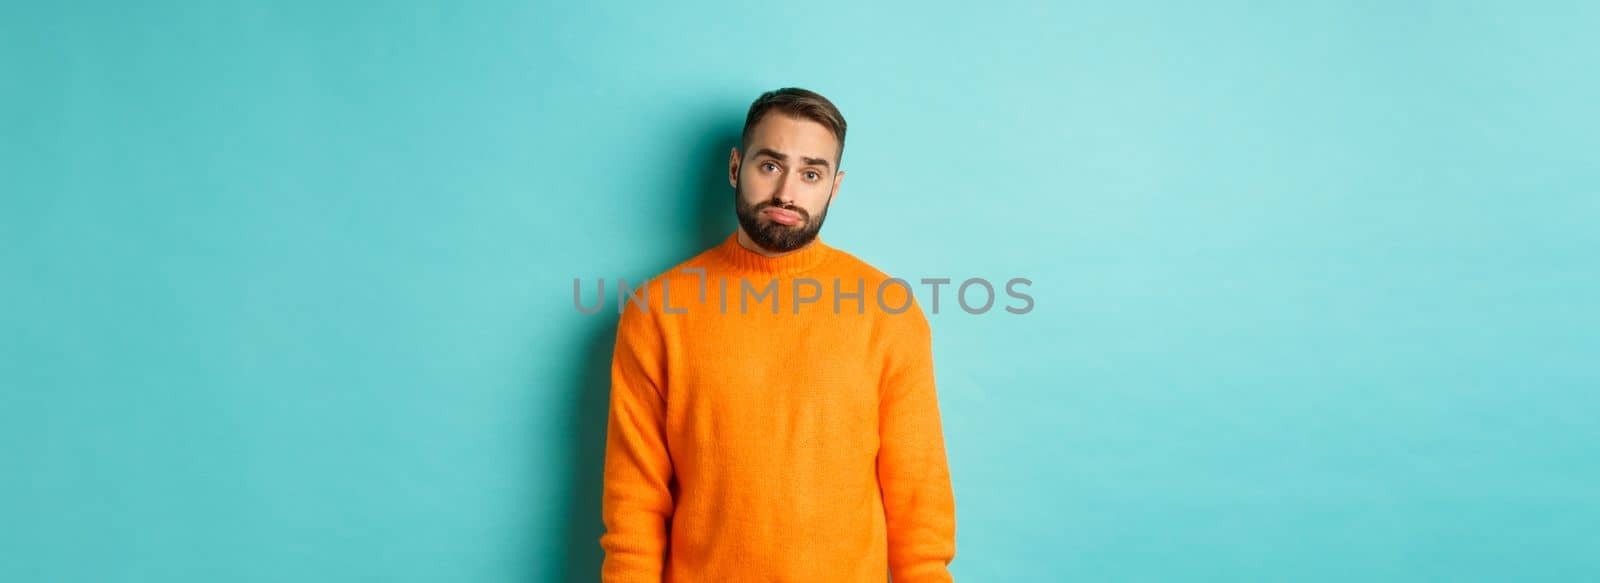 Sad man looking at camera, sulking and feeling distressed, standing over light blue background.